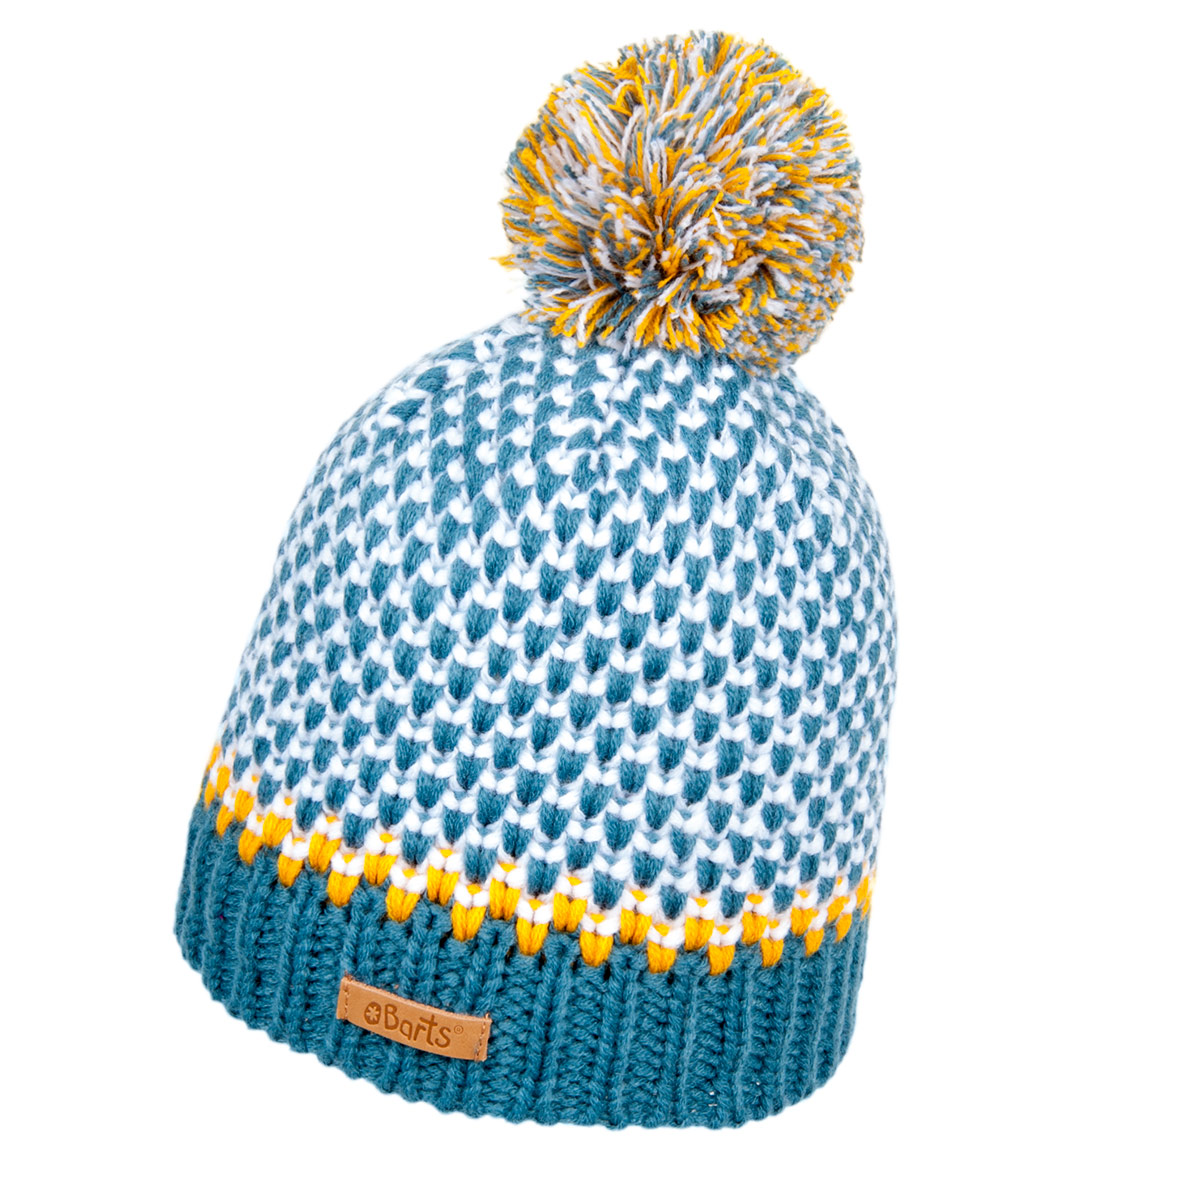 sterk Betsy Trotwood Surrey BARTS kids hat with pompom and warm lining